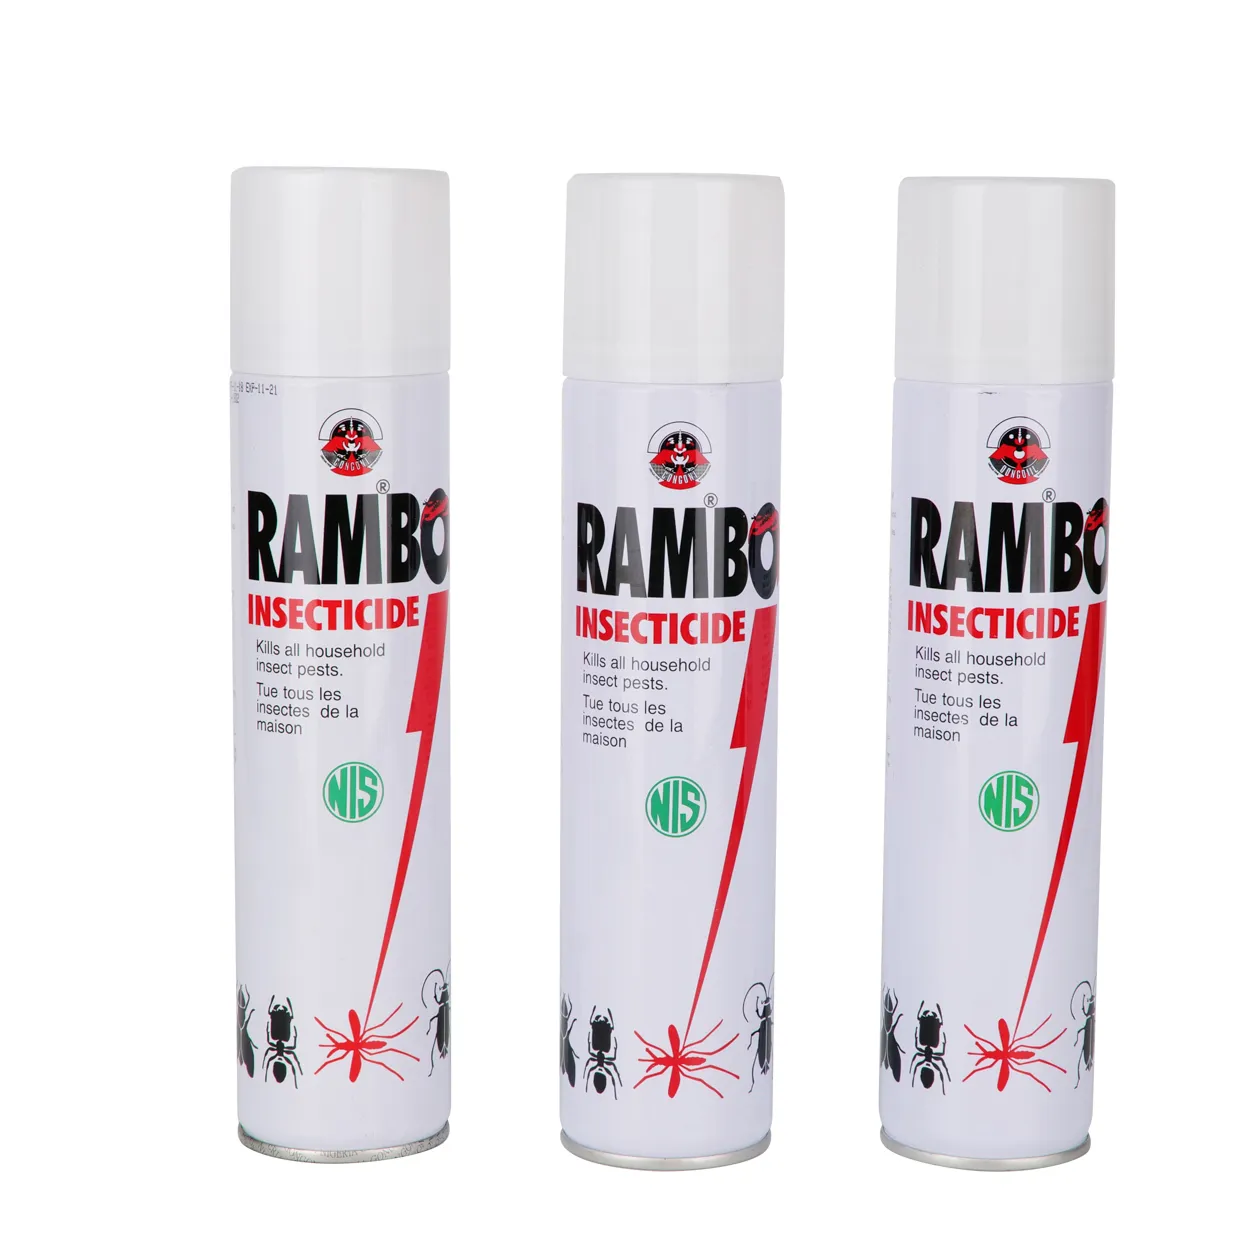 RAMBO – Africa Market Popular Daily Chemical Insecticide Spray